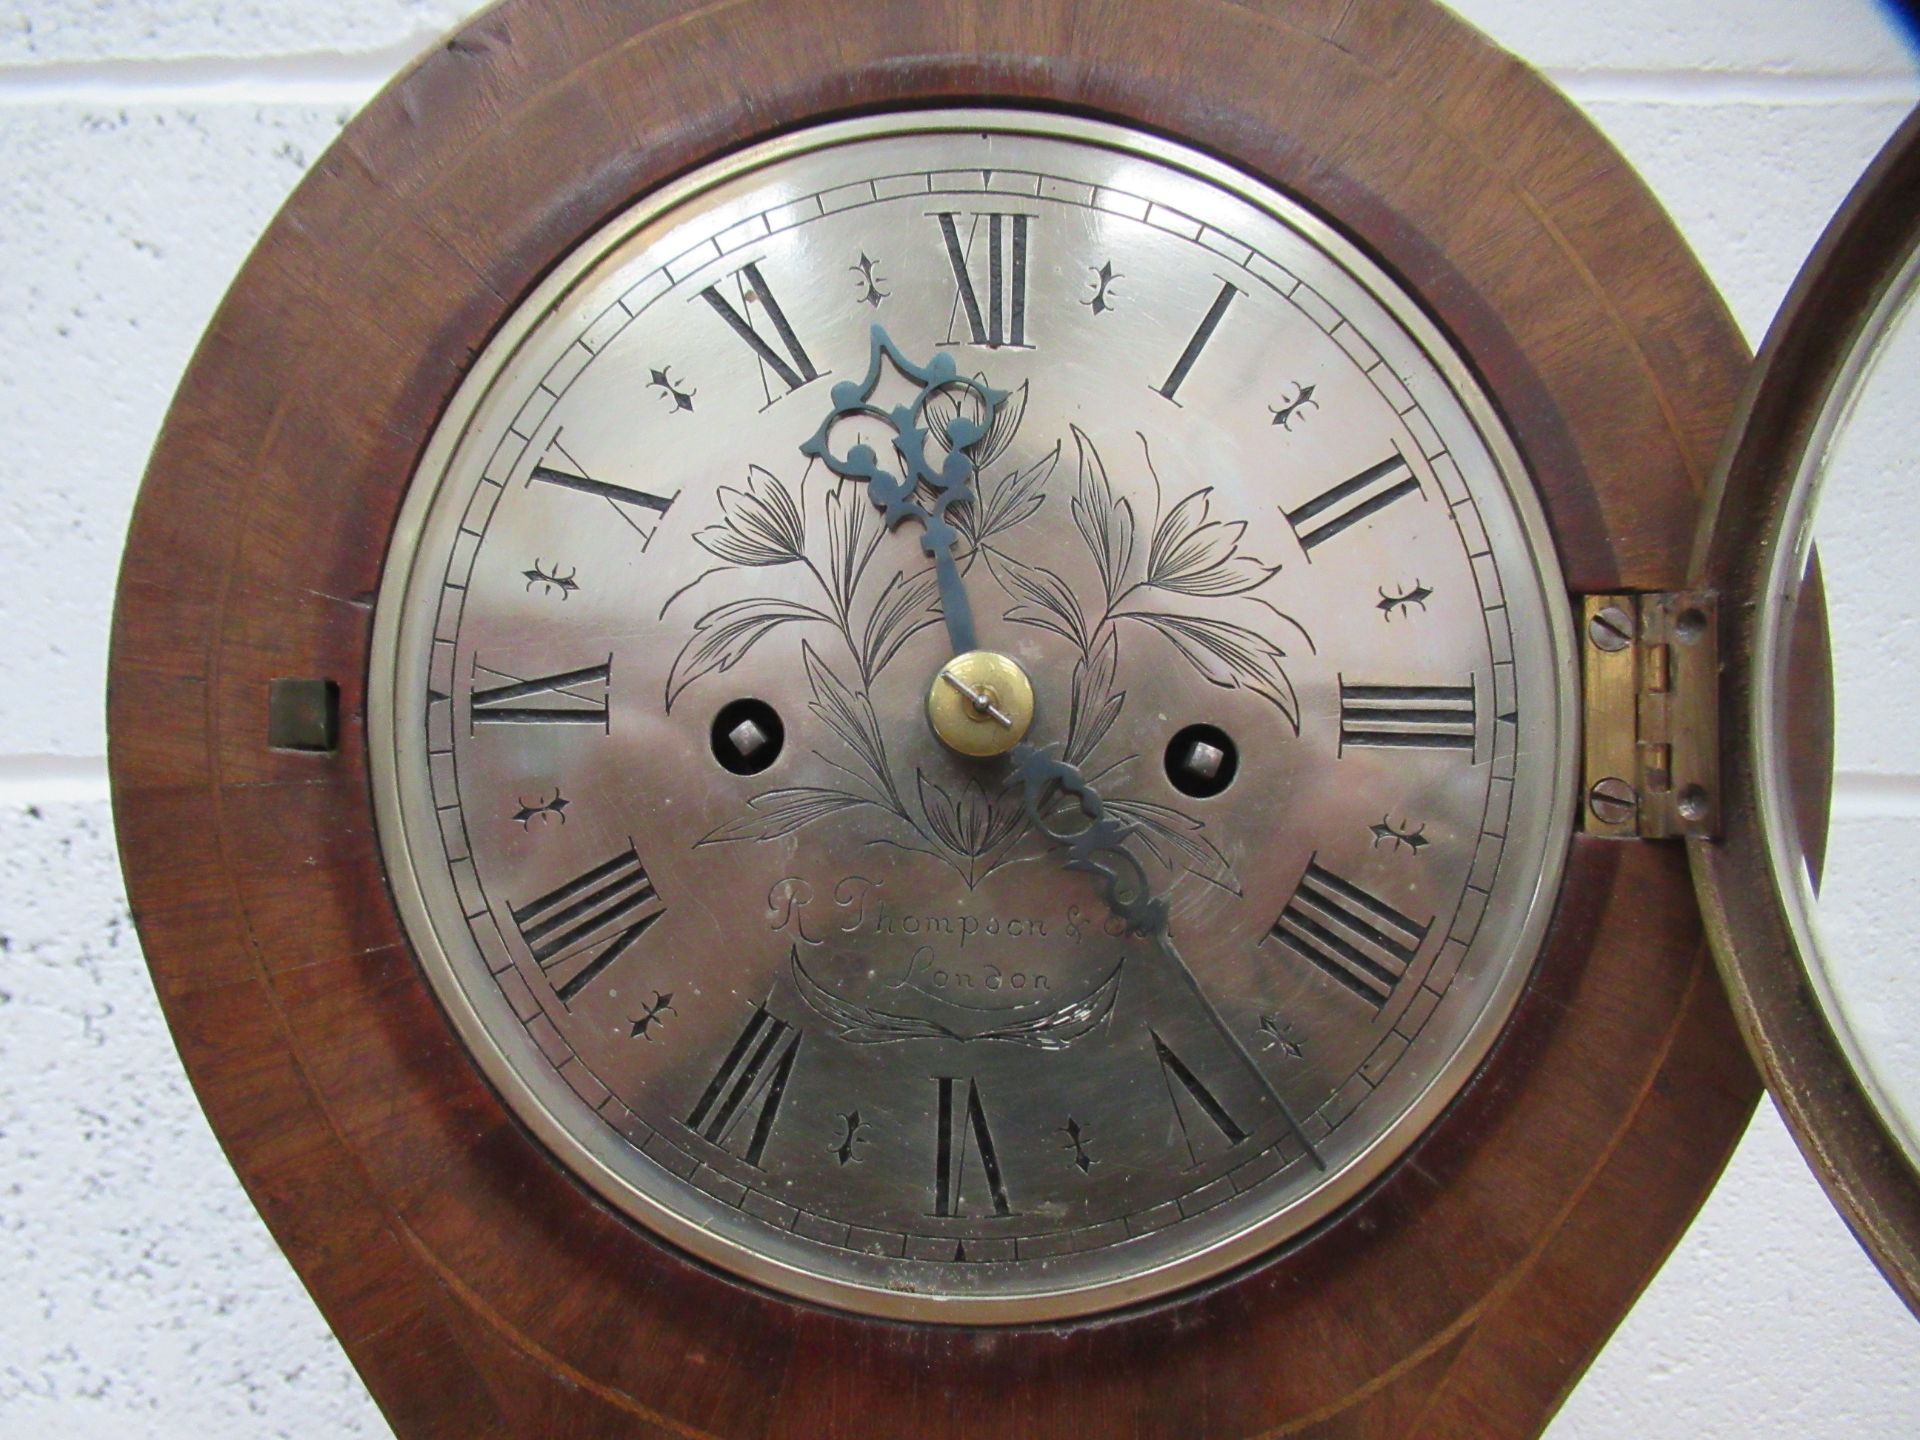 Wooden Balloon Clock with 'R Thompson & Son-London' Engraved to Clock Face - Image 4 of 6